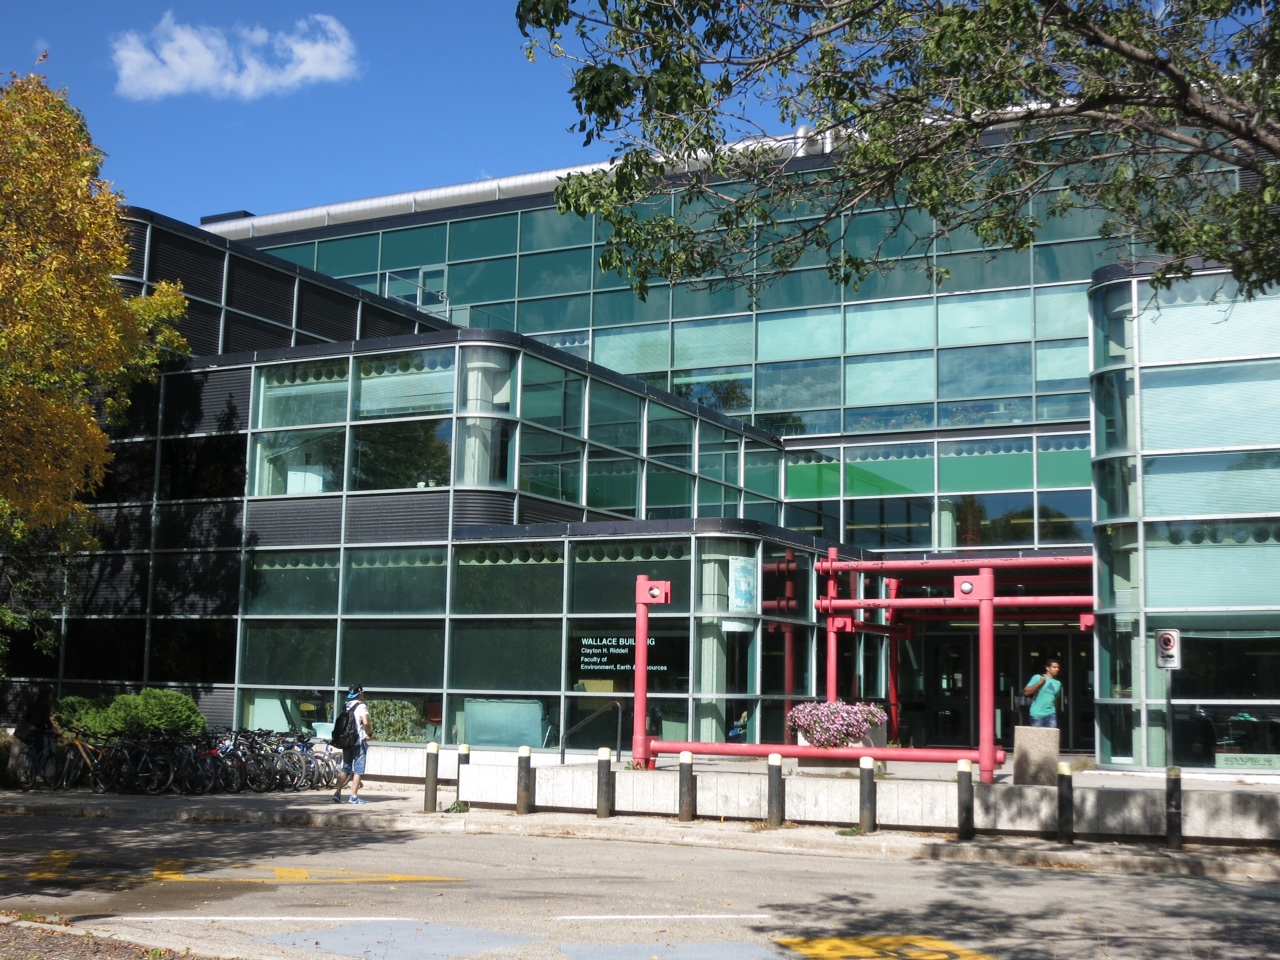 Image shows large building clad entirely in glass. There are bright red pipes at the entrance.